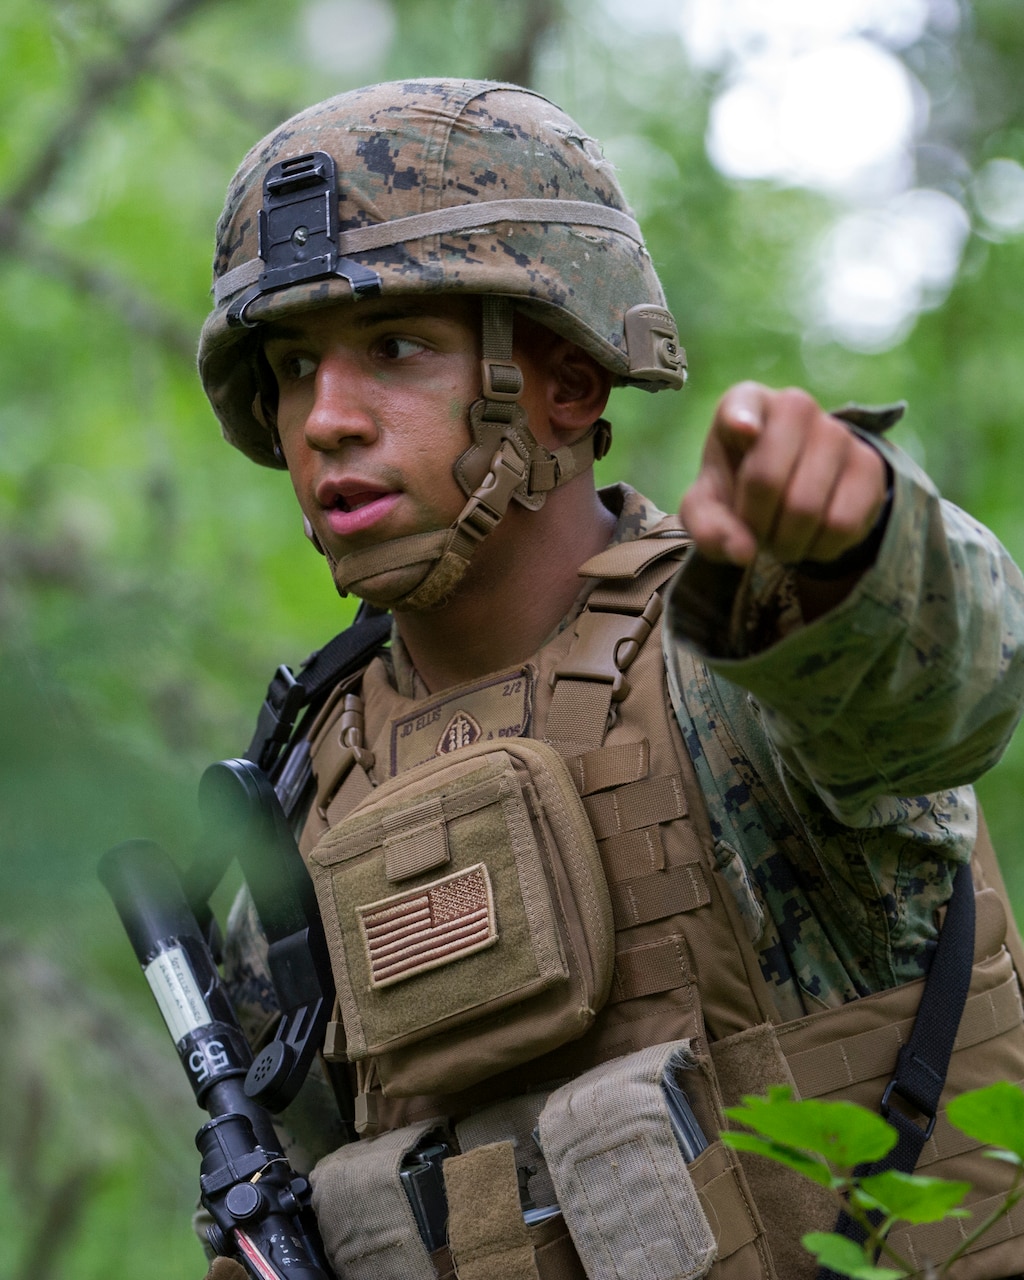 A Marine wearing combat equipment points toward the camera.